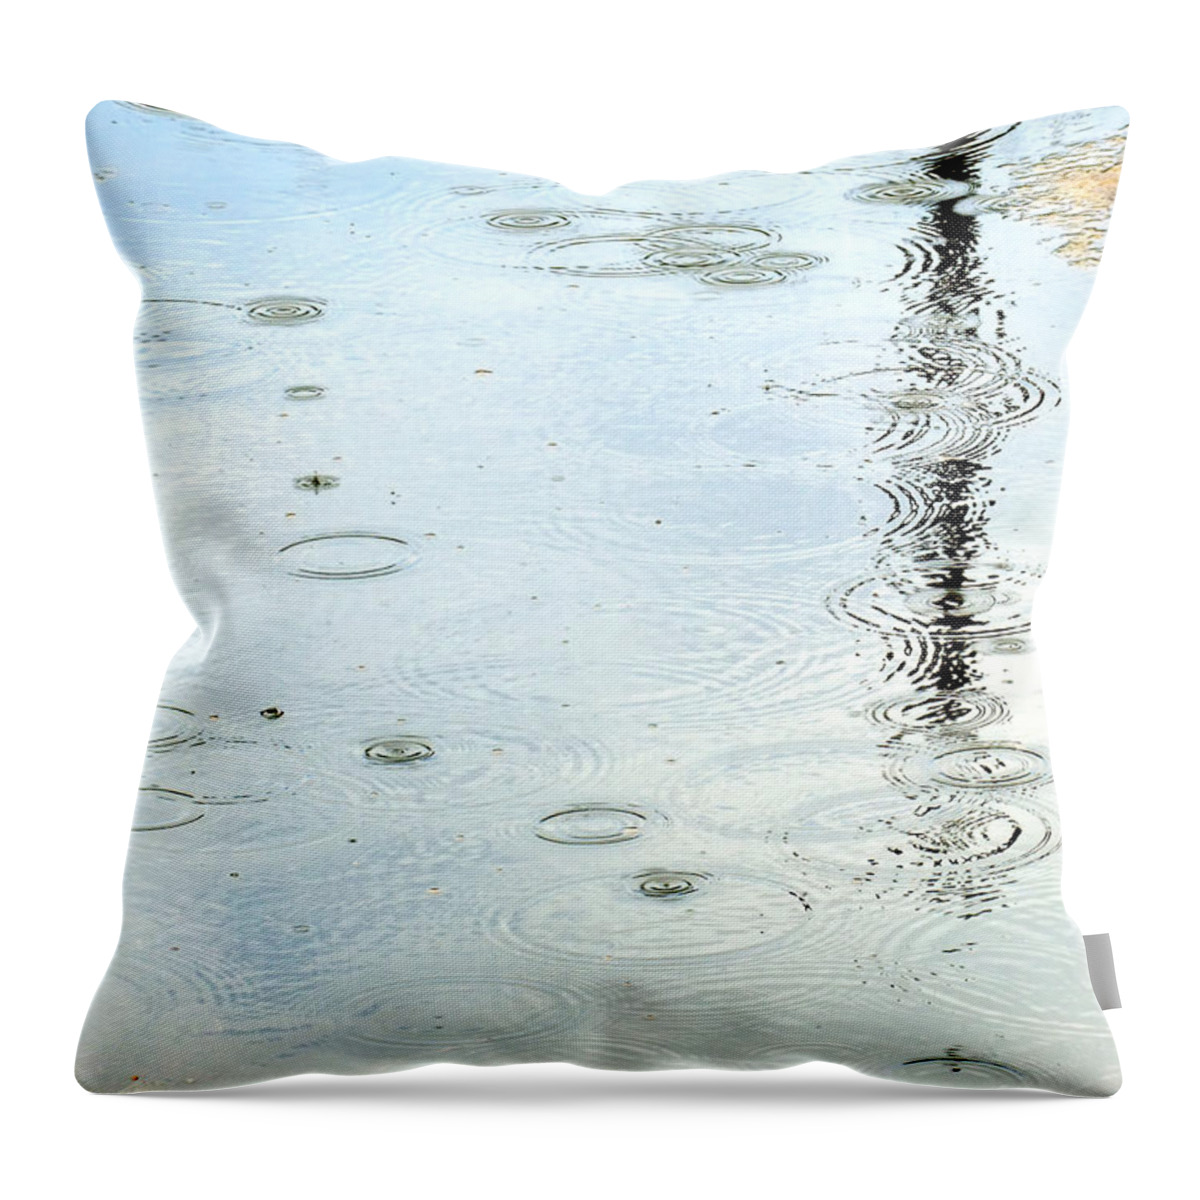 Water Throw Pillow featuring the photograph Raindrop Abstract by Kae Cheatham